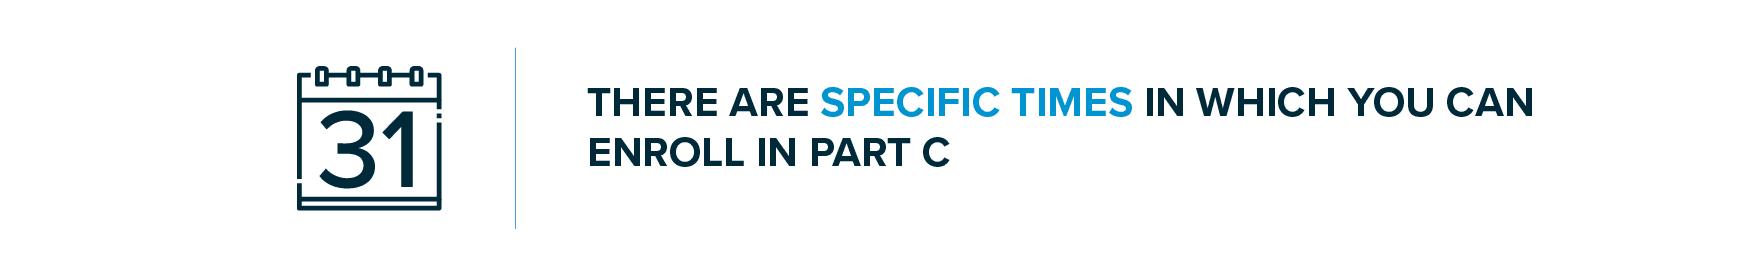 There are specific times in which you can enroll in Part C.